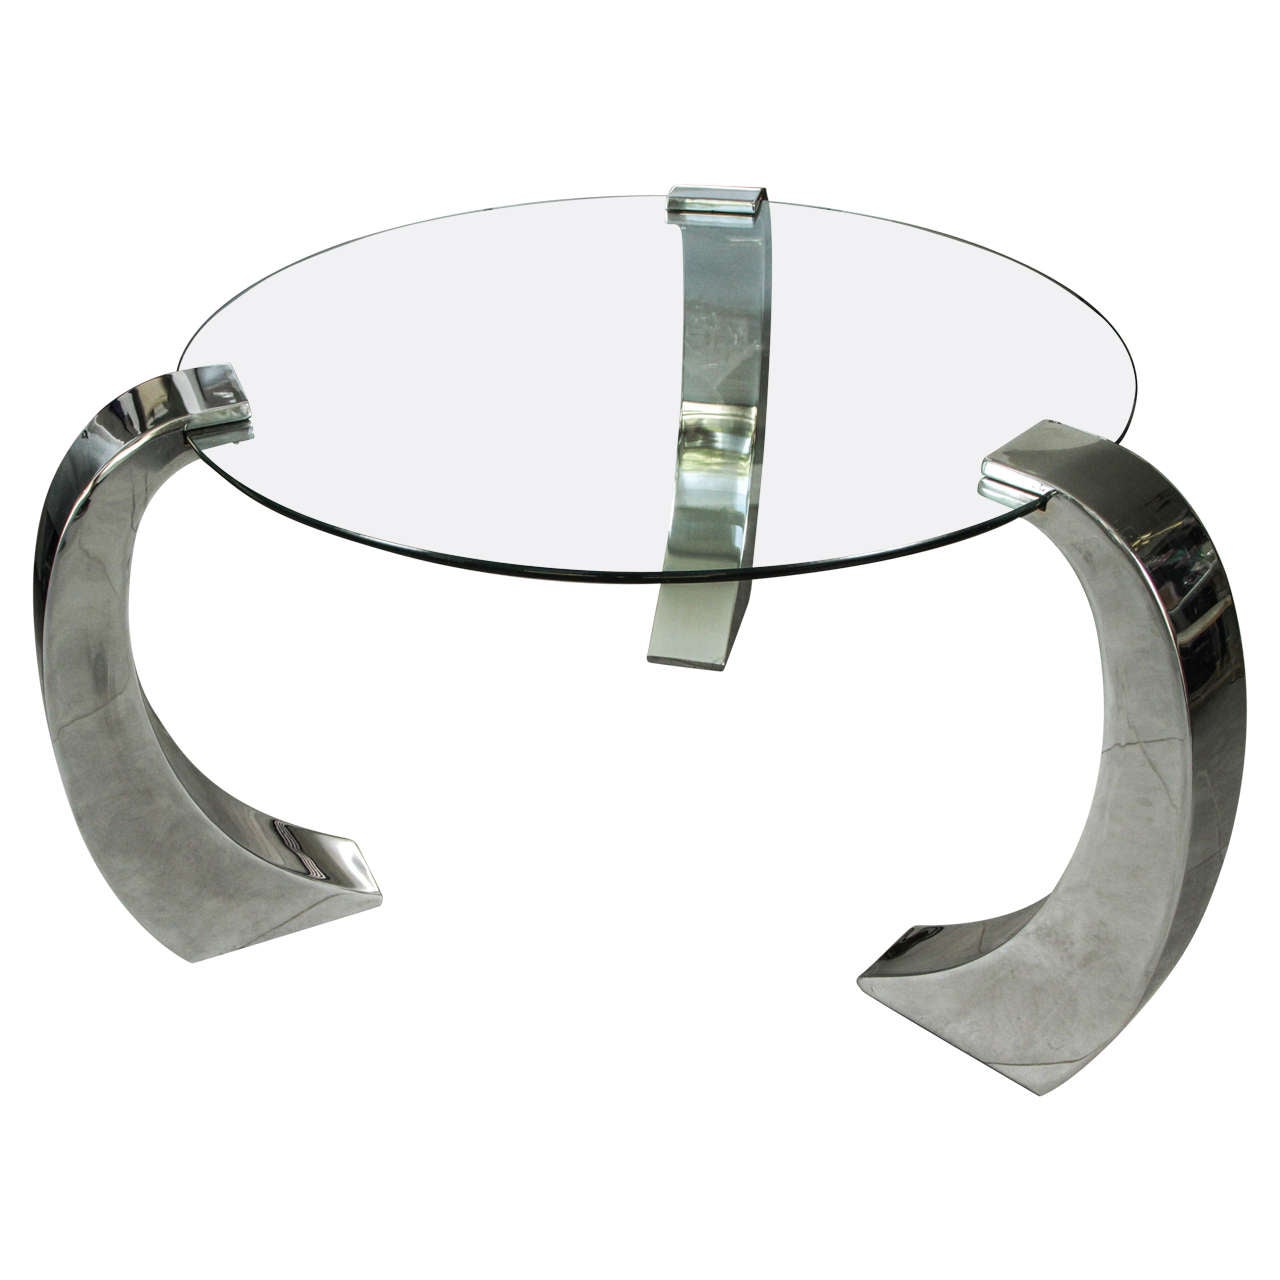 Circular Center Table of Glass with a Base of Three Discreet Chrome Supports